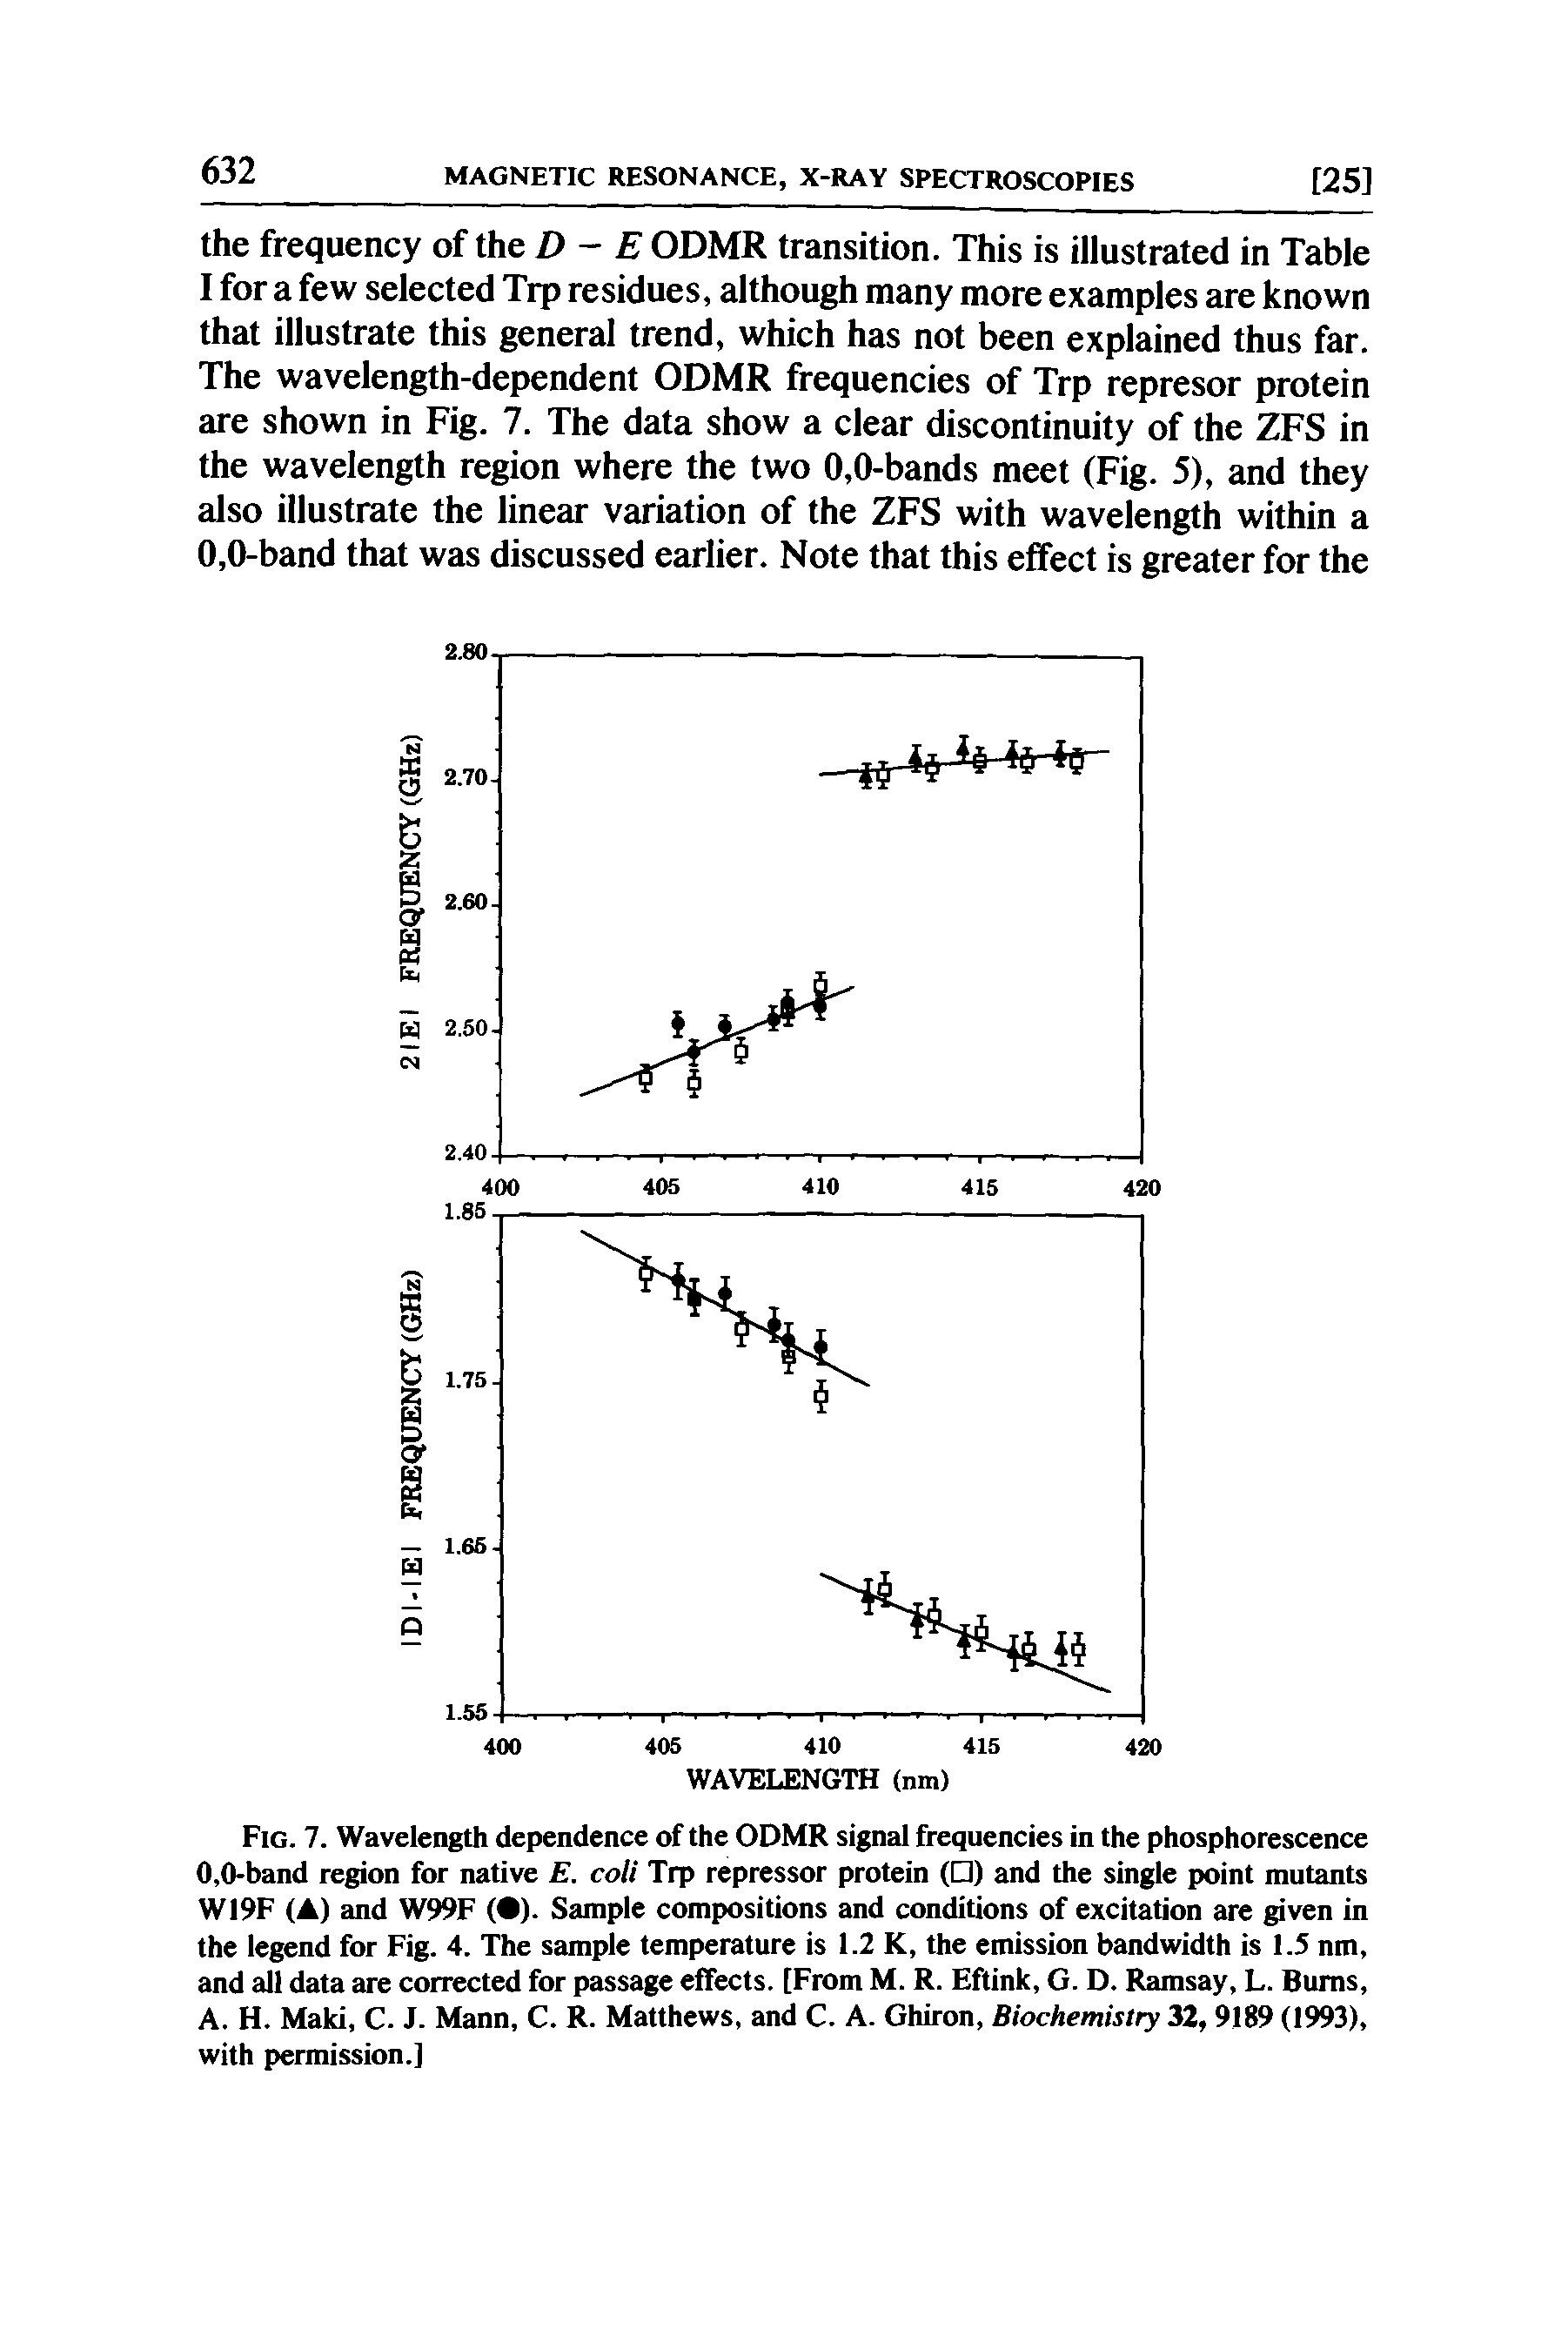 Fig. 7. Wavelength dependence of the ODMR signal frequencies in the phosphorescence 0,0-band region for native E. coli Trp repressor protein ( ) and the single point mutants WI9F (A) and W99F ( ). Sample compositions and conditions of excitation are given in the legend for Fig. 4. The sample temperature is 1.2 K, the emission bandwidth is 1.5 nm, and all data are corrected for passage effects. [From M. R. Eftink, G. D. Ramsay, L. Bums, A. H. Maki, C. J. Mann, C. R. Matthews, and C. A. Ghiron, Biochemistry 32, 9189 (1993), with permission.]...